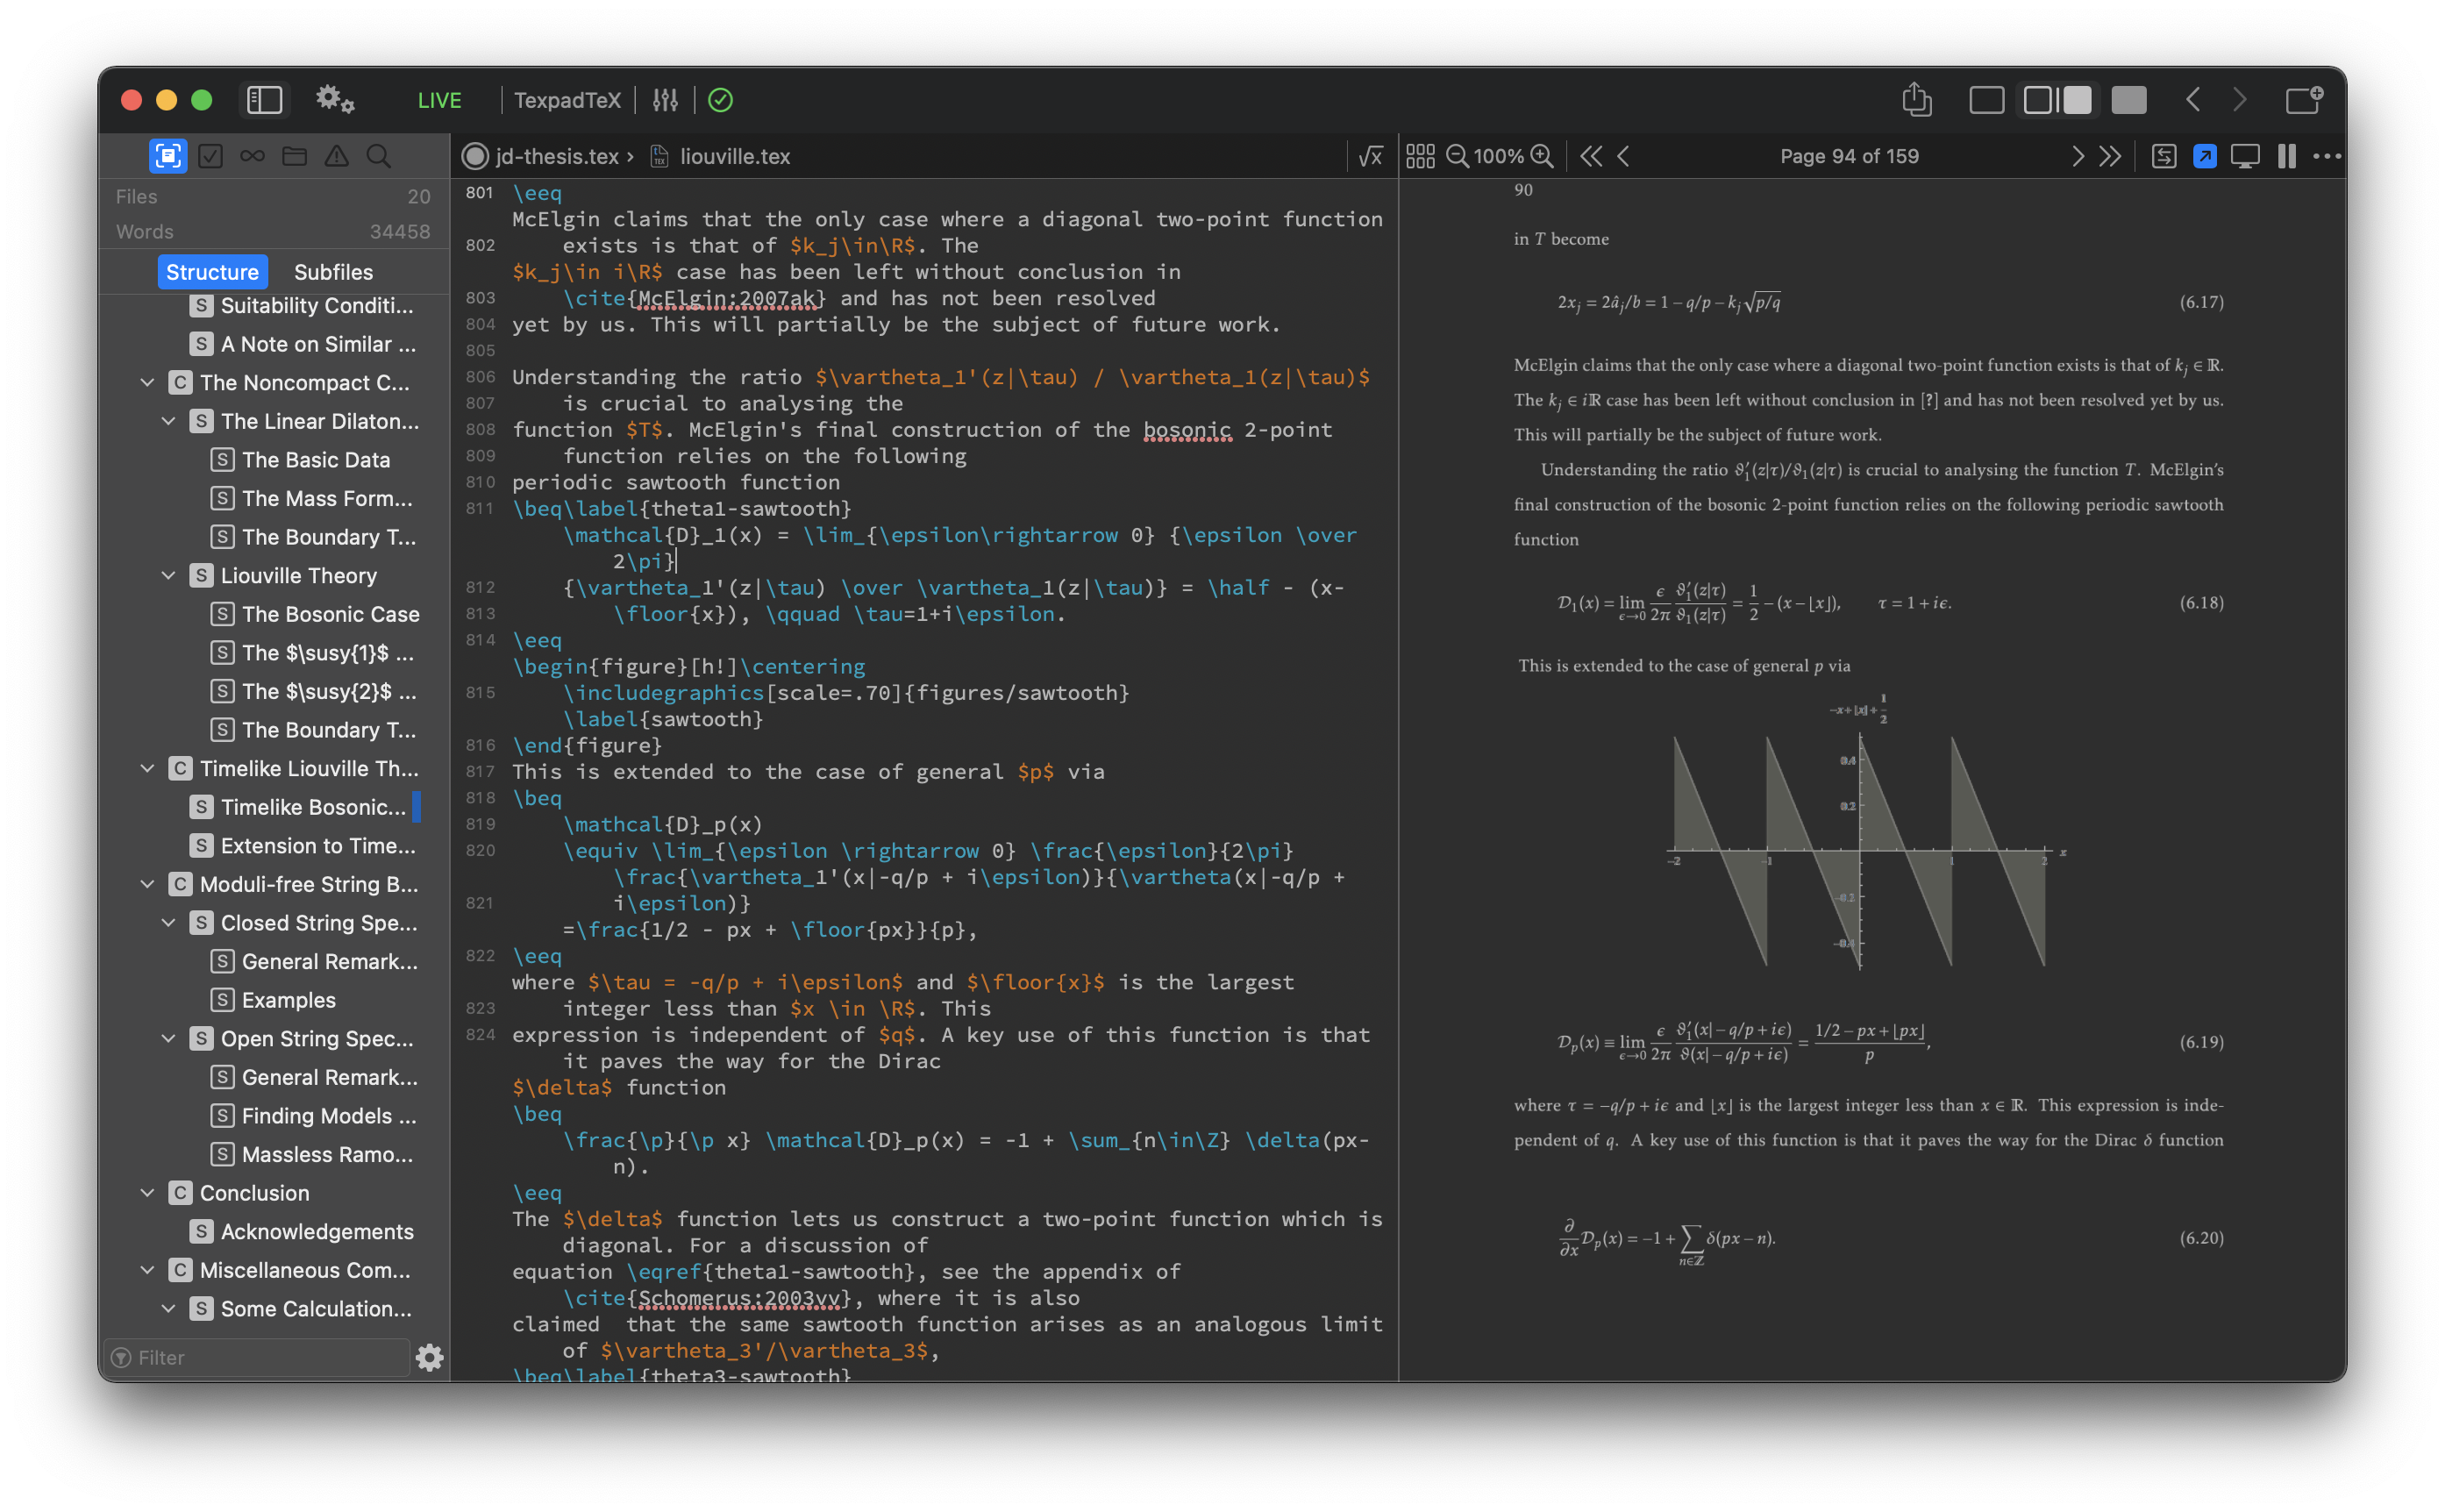 docs/apps/workspace/jd-thesis-sawtooth-dark-mode_macos.png